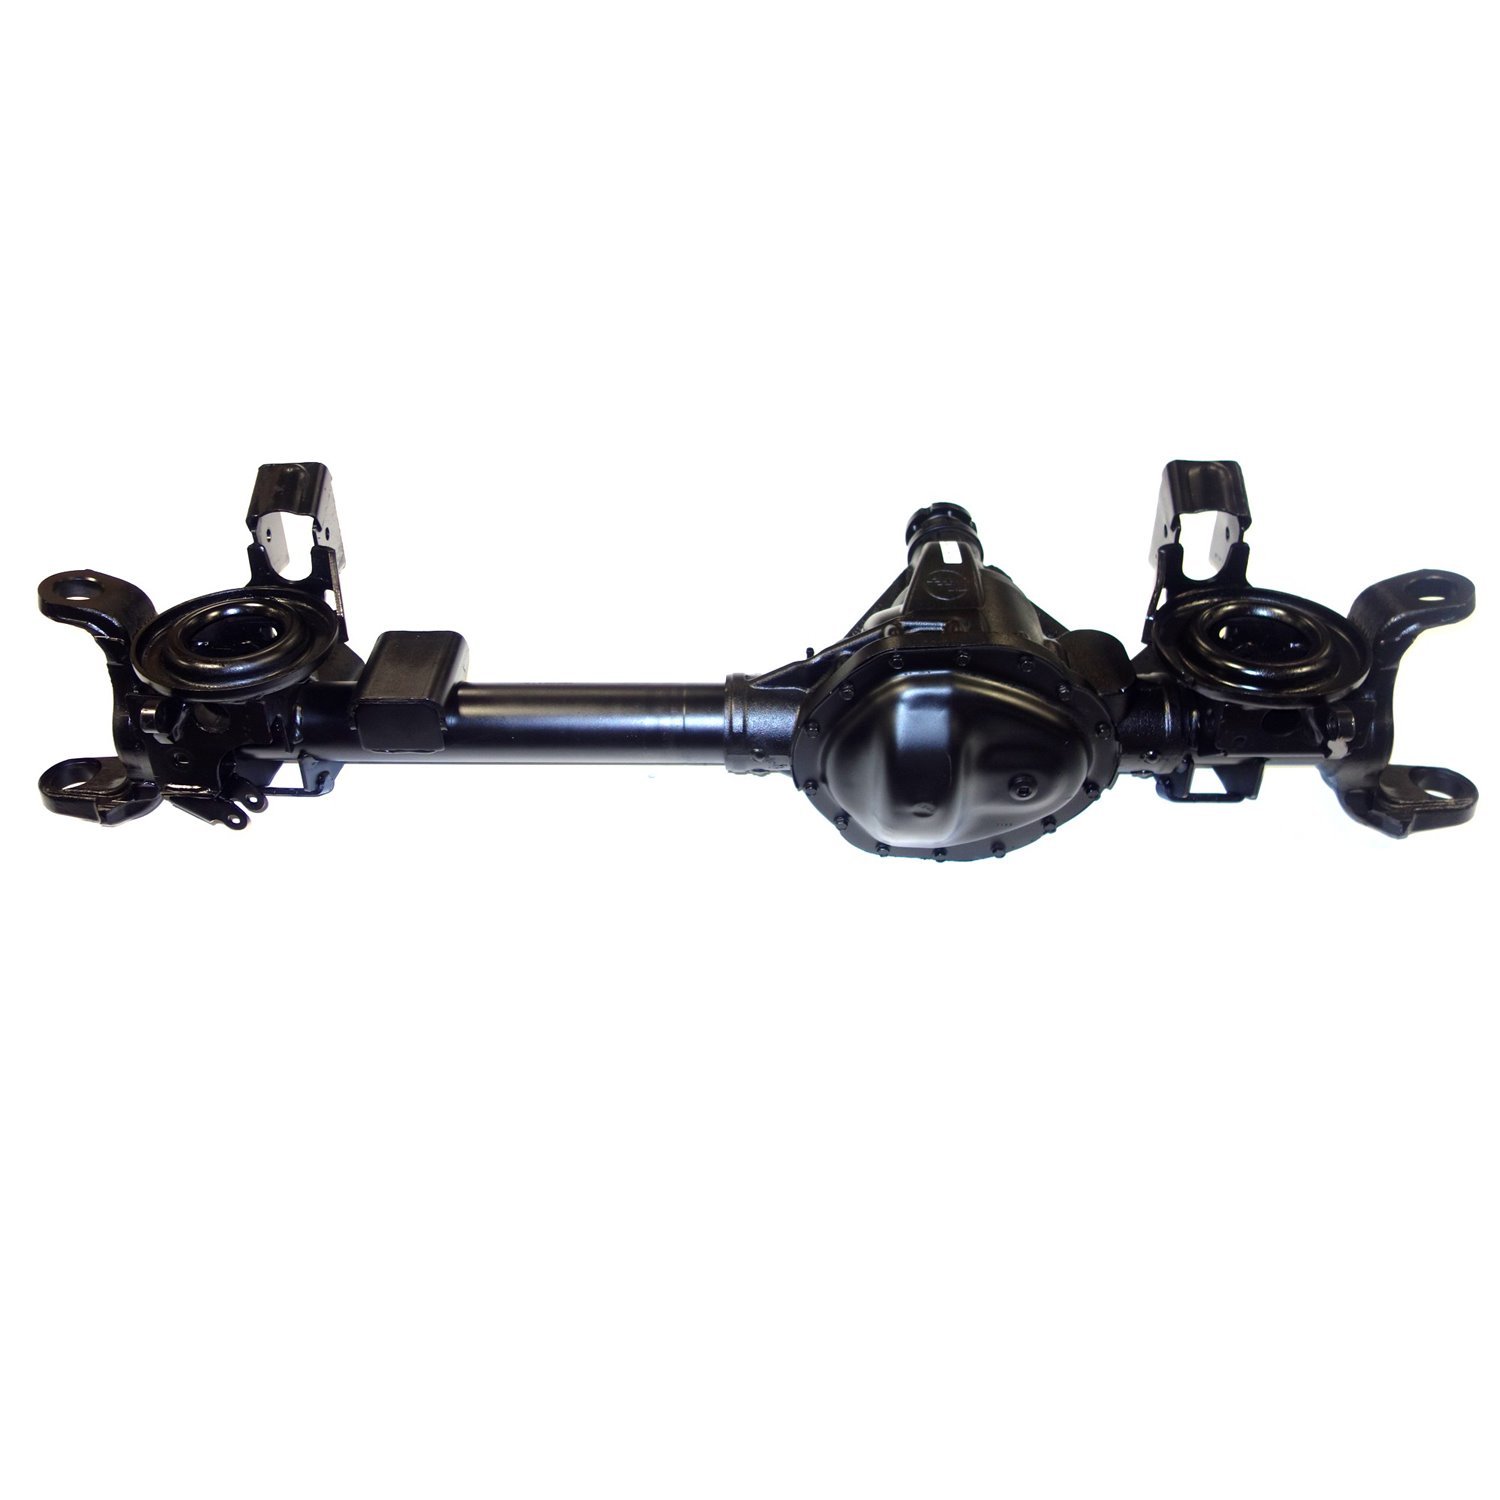 Remanufactured Chy 9.25" Axle Assy for 2006-3/18/07 Ram 1500 Mega Cab, 2500 & 3500, 3.73